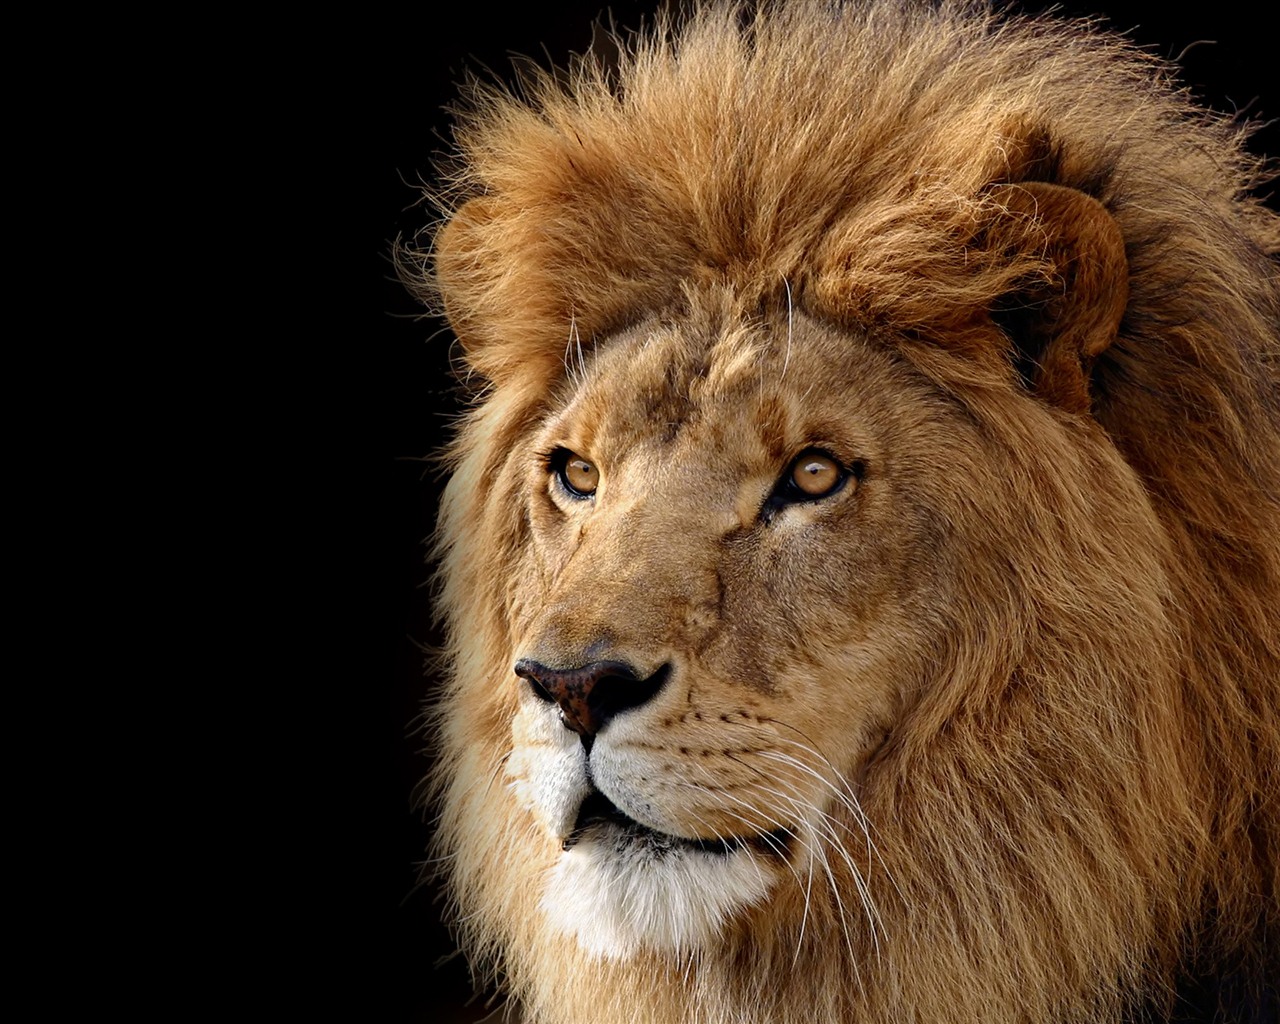 Mac OS X the Lion Apple systems official HD wallpapers #14 - 1280x1024